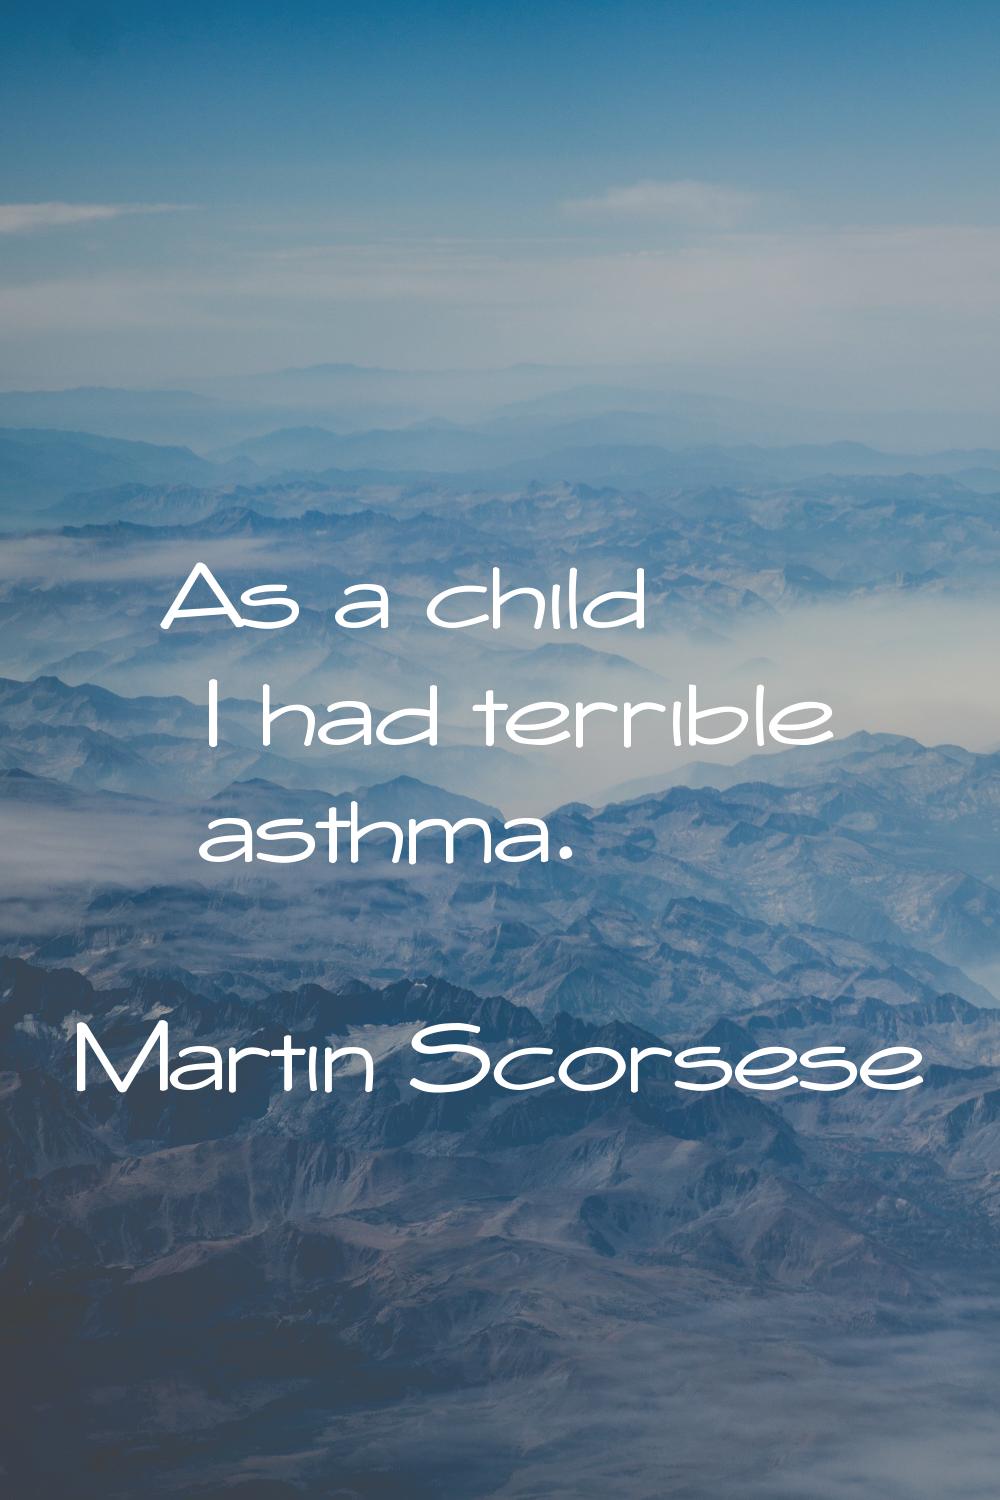 As a child I had terrible asthma.